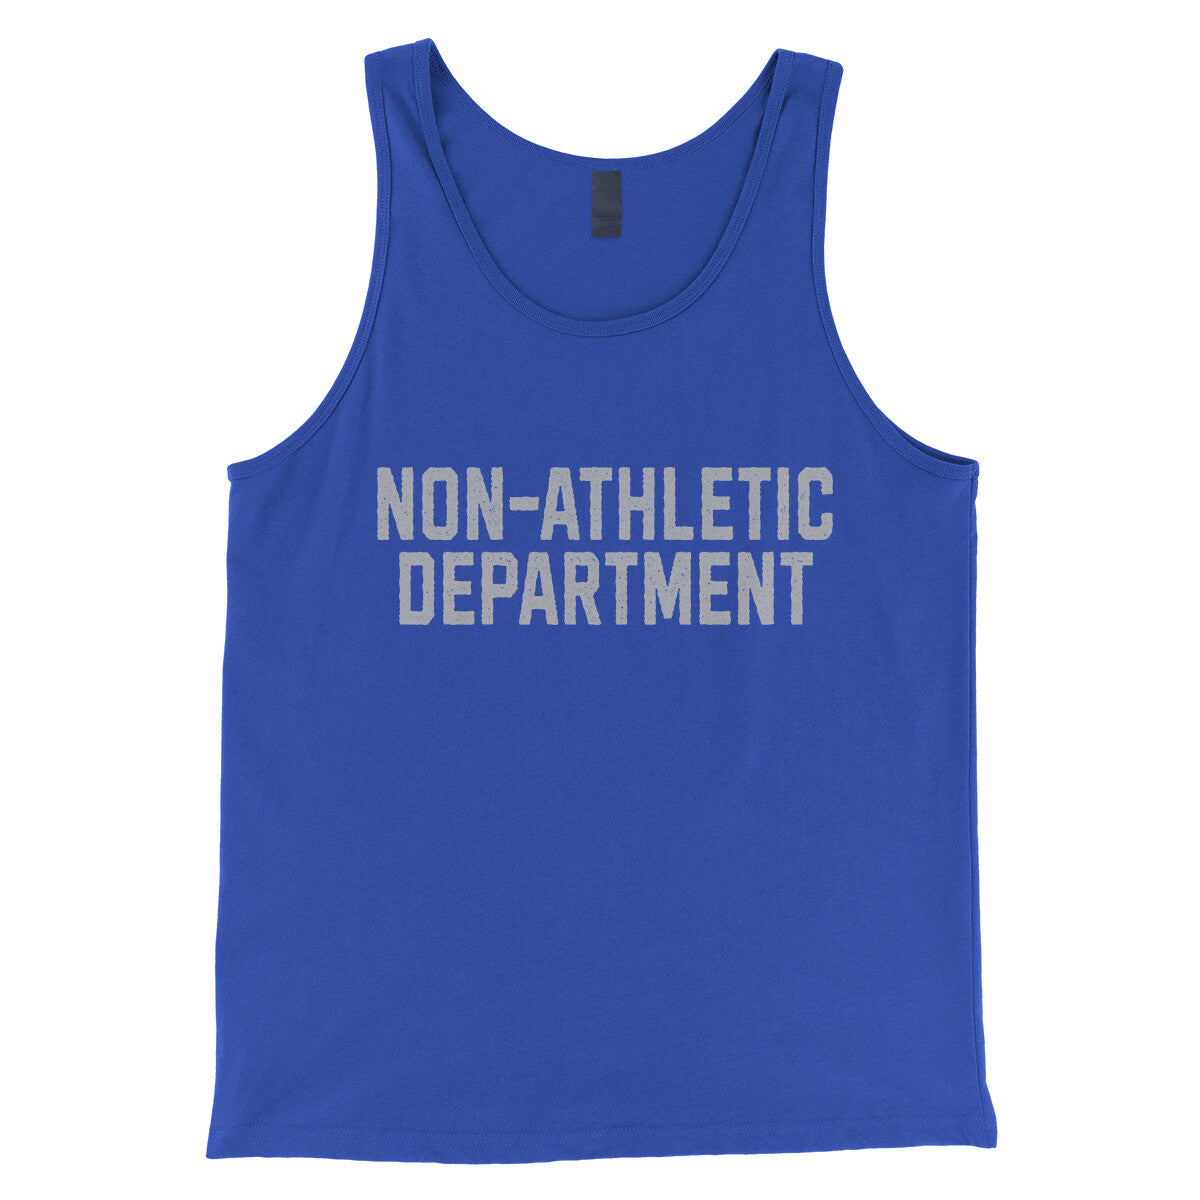 Non-Athletic Department in True Royal Color